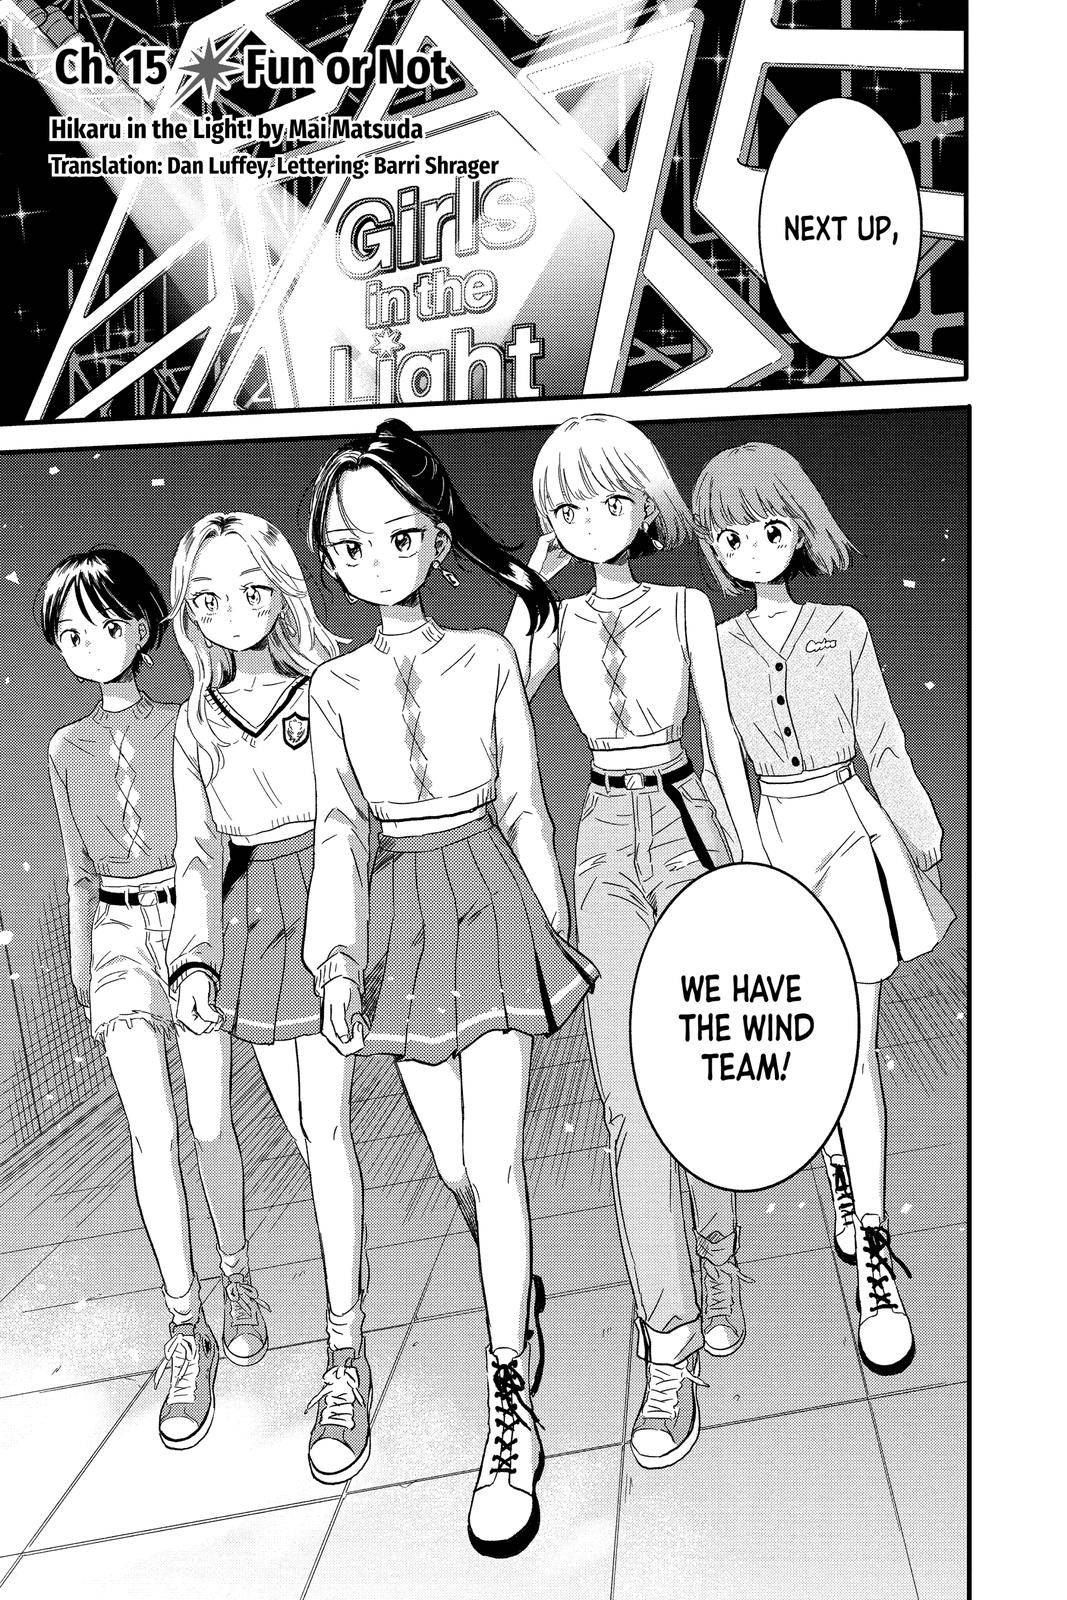 Hikaru In The Light! - chapter 15 - #1